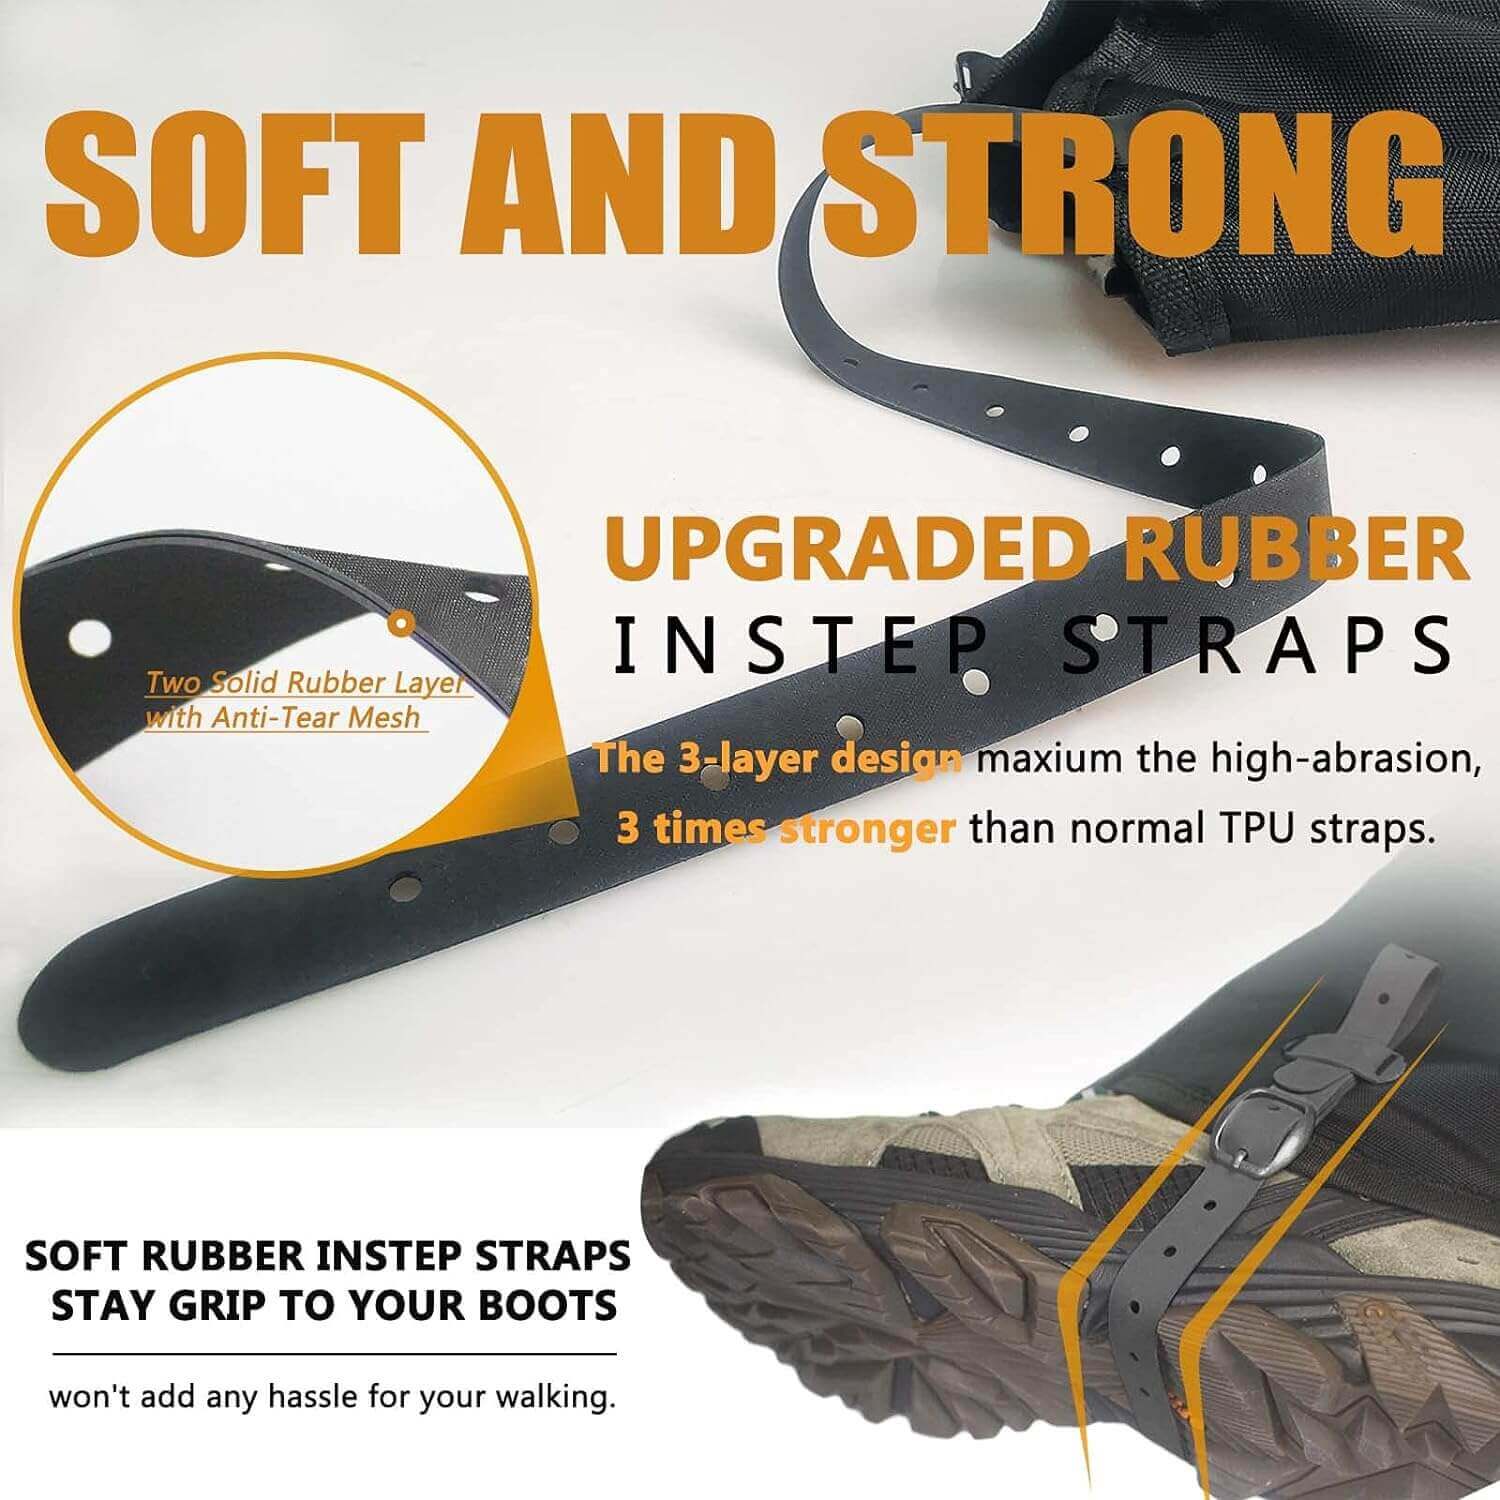 Shop The Latest >Ultra High-Performance 100% Waterproof Hiking Gaiters > *Only $40.49*> From The Top Brand > *Frelaxyl* > Shop Now and Get Free Shipping On Orders Over $45.00 >*Shop Earth Foot*